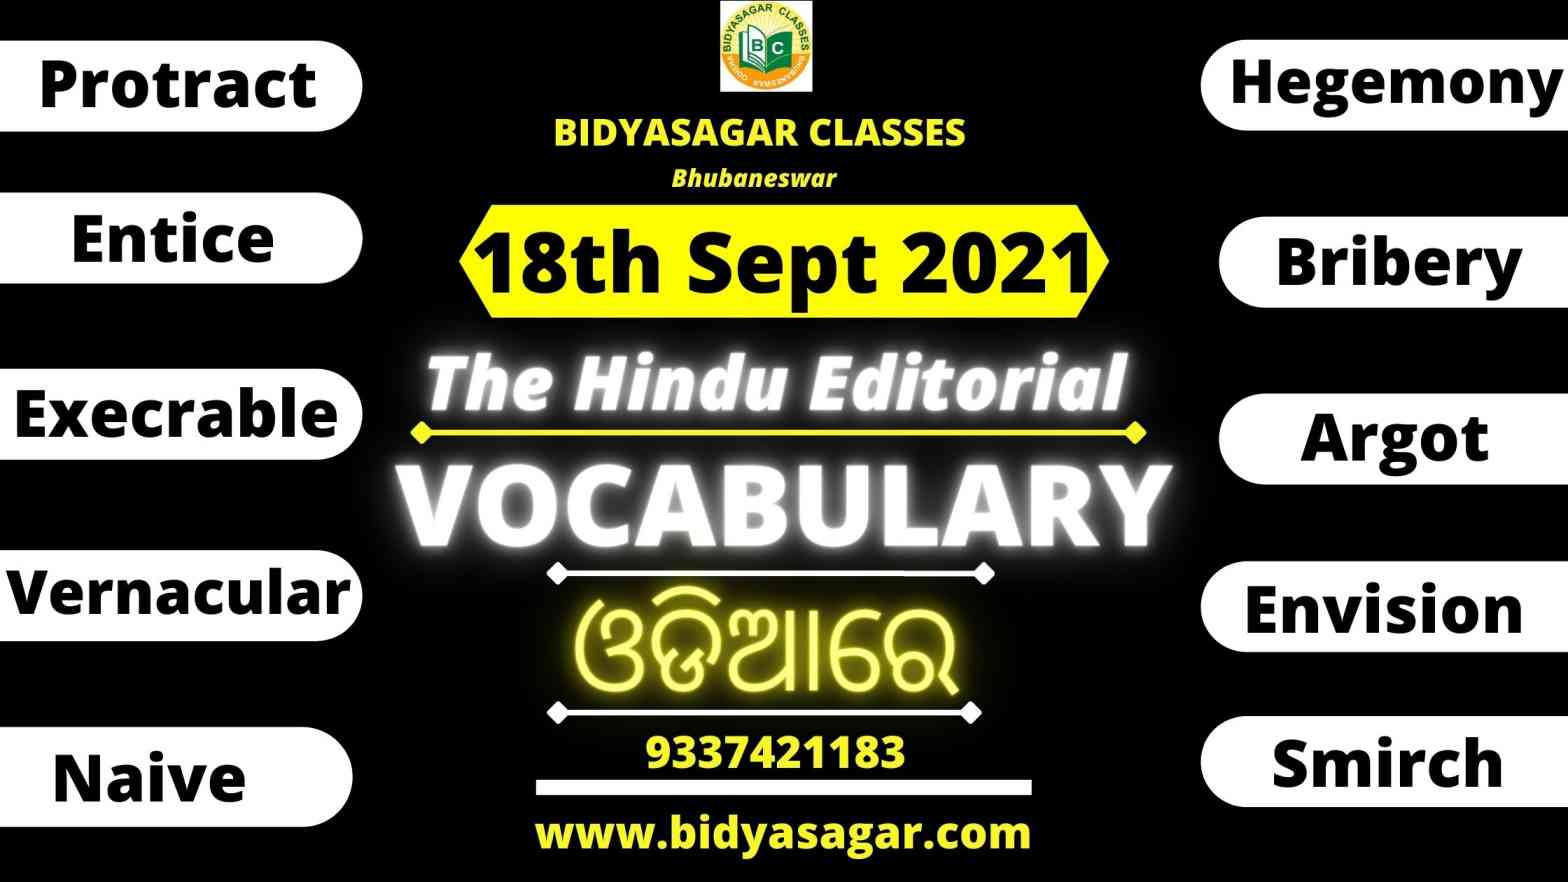 The Hindu Editorial Vocabulary of 18th September 2021